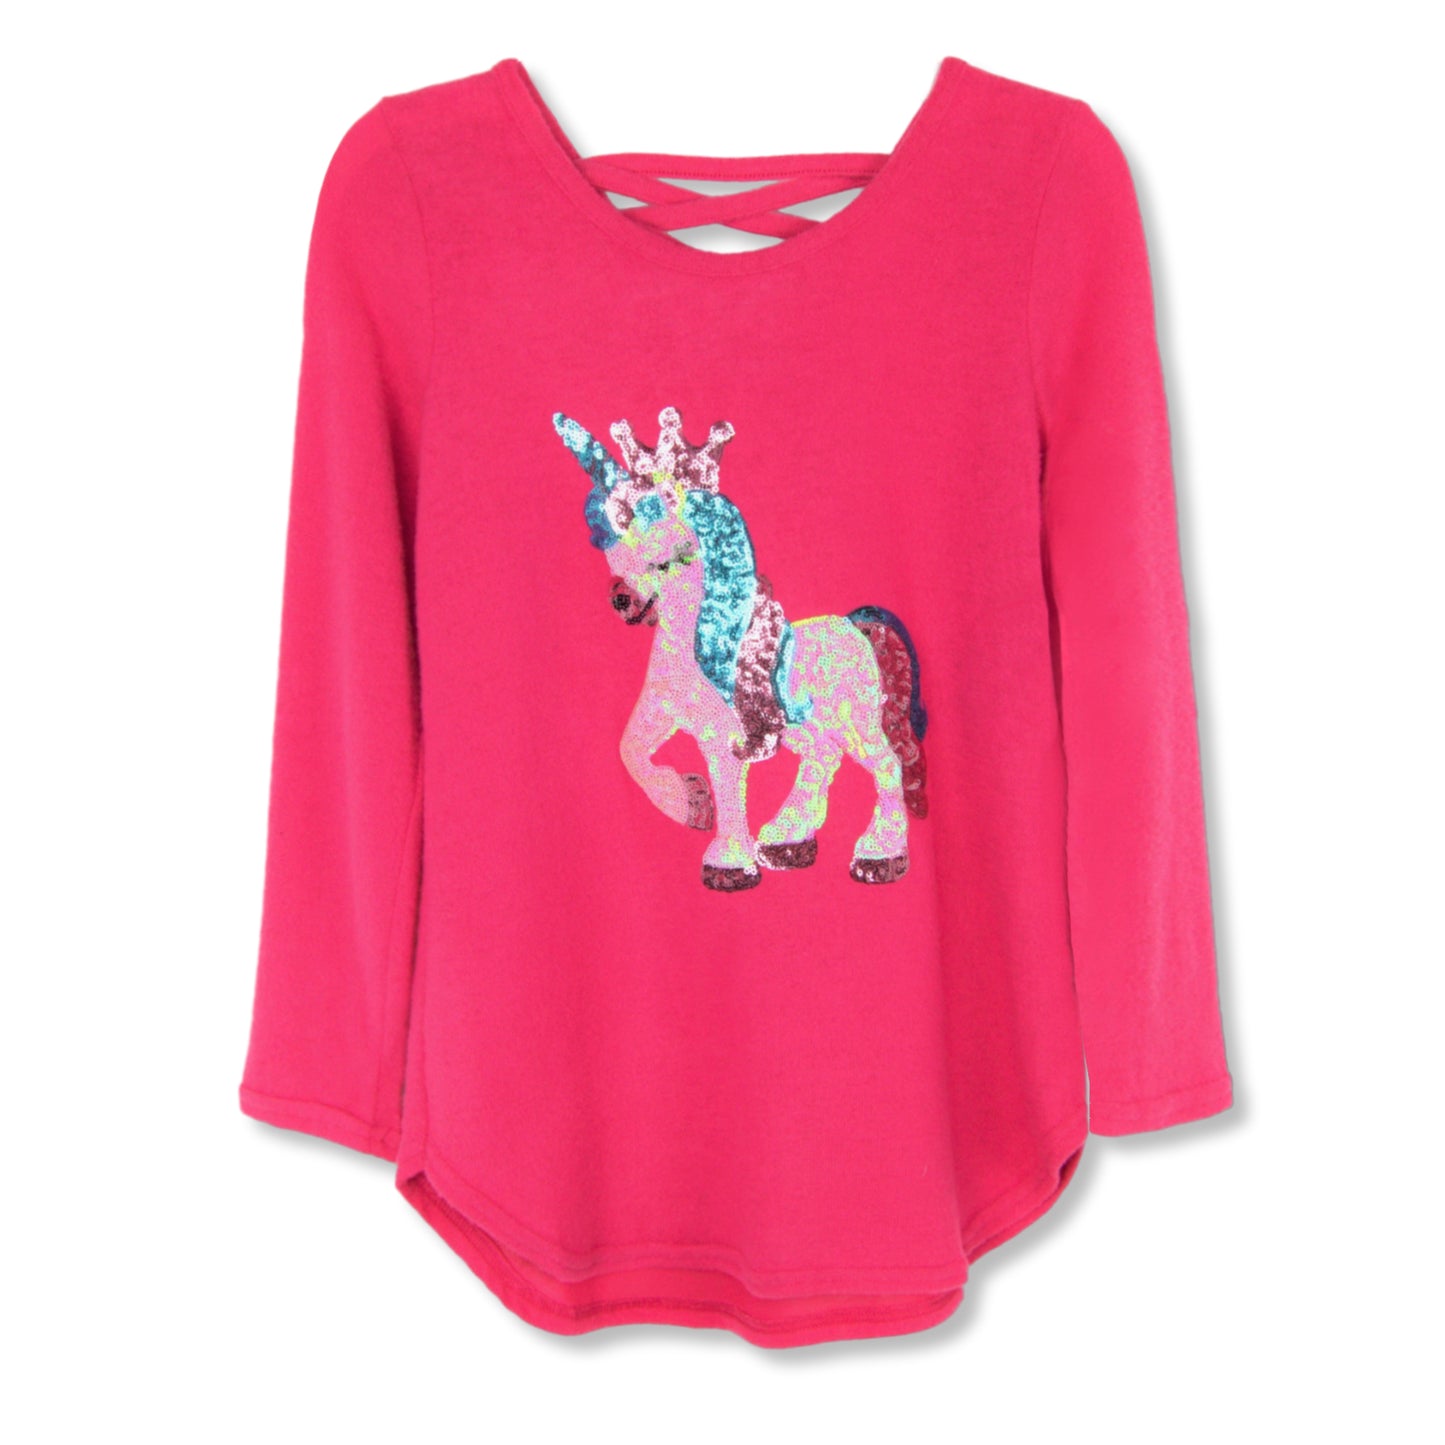 Poof Girl Soft Cotton Blend Sequin Unicorn Sweater Knit Top